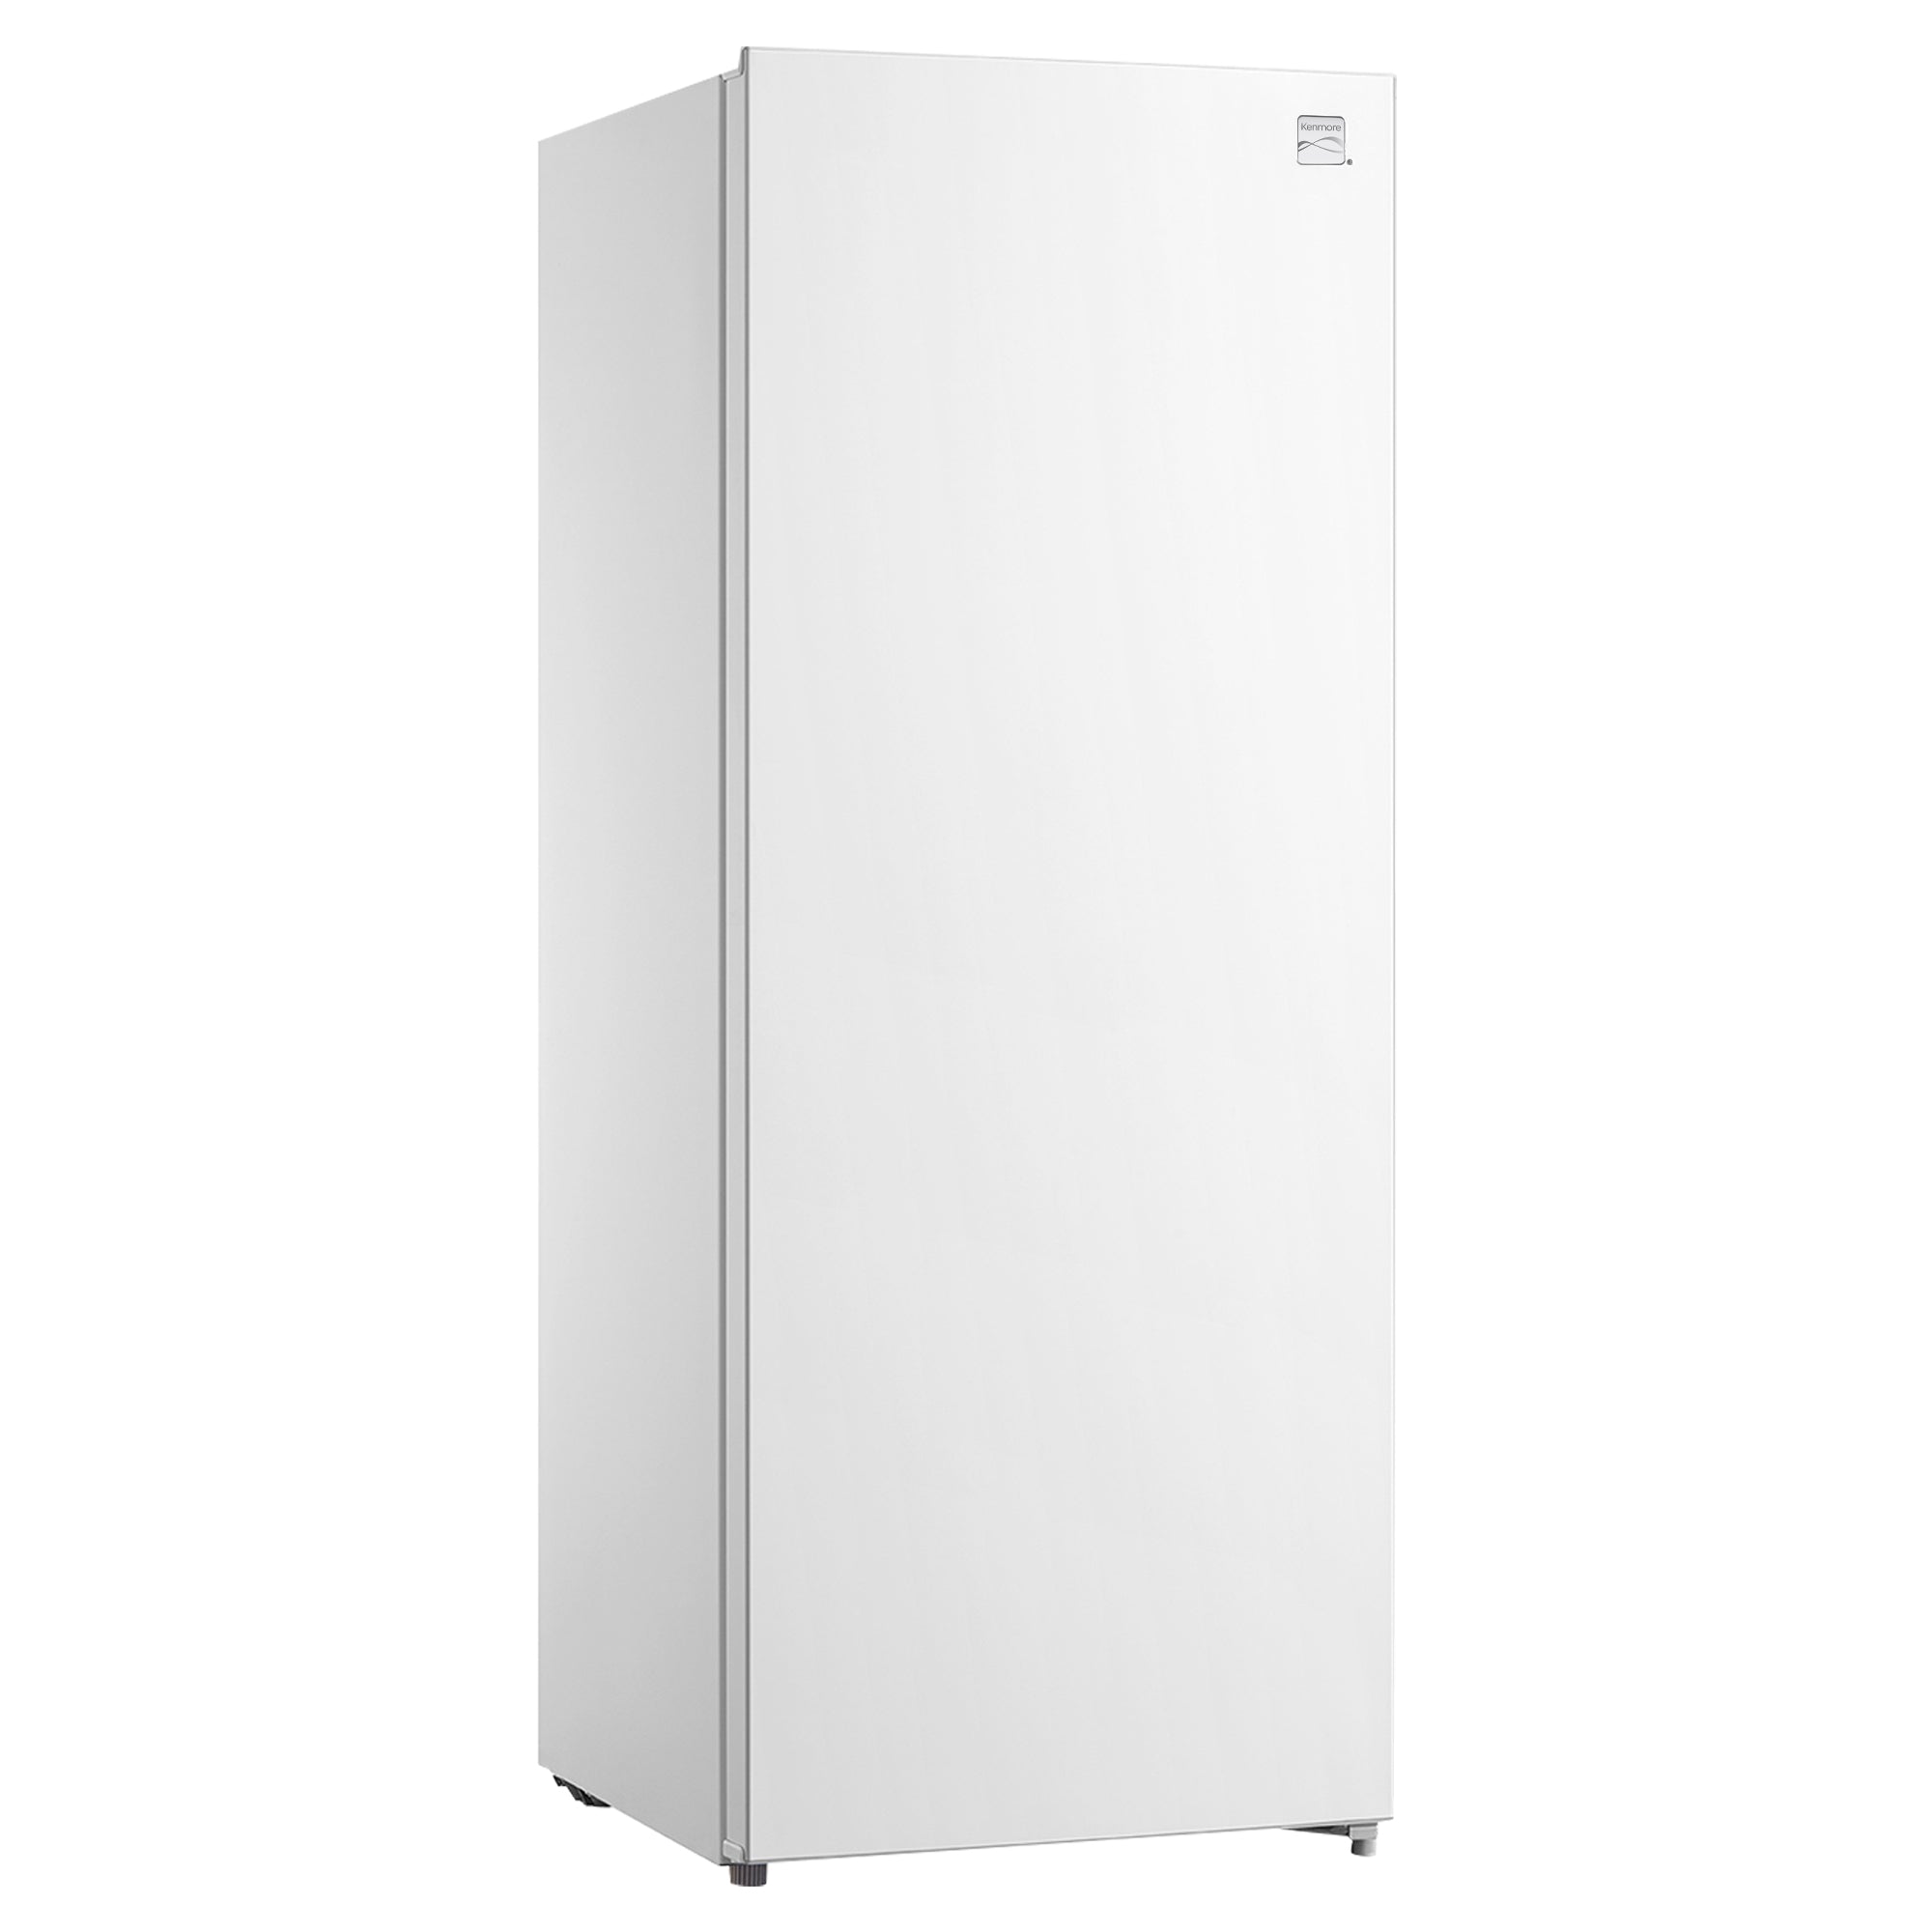 Kenmore convertible upright freezer/refrigerator, closed, on a white background.